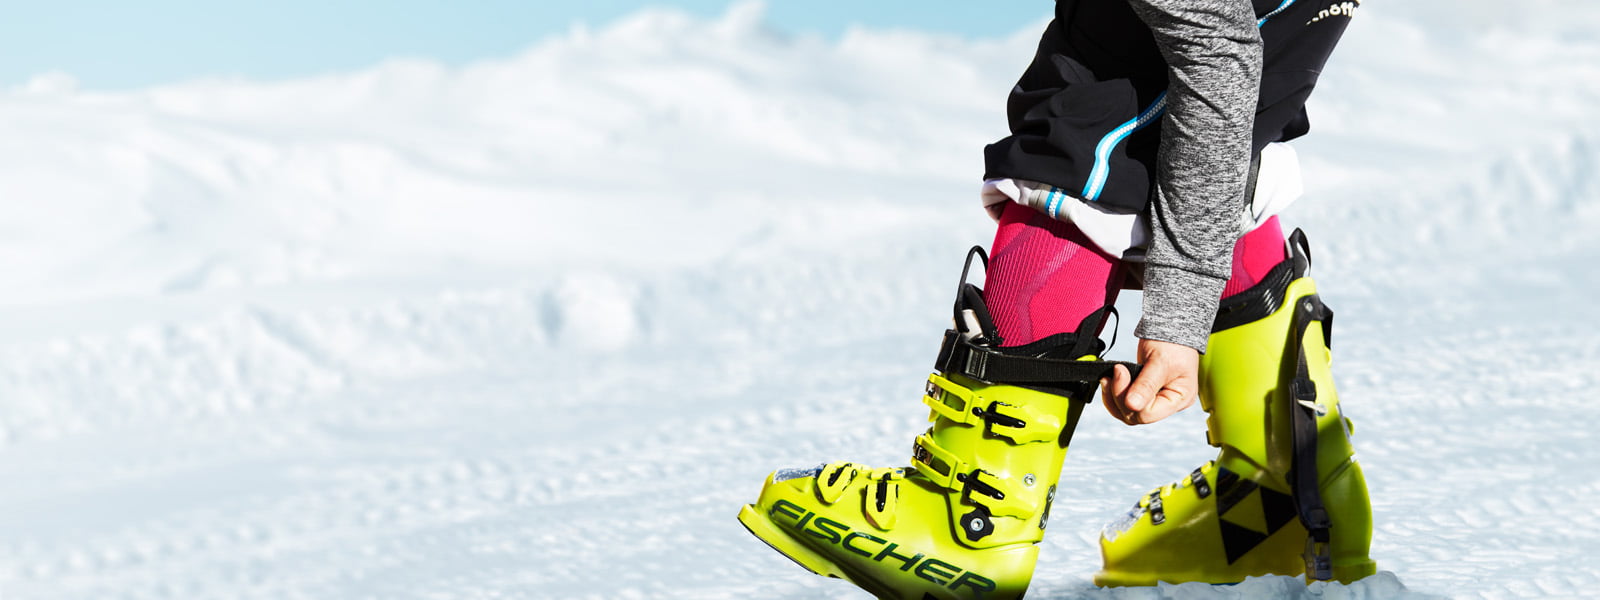 Skiers with pink ski socks and gray sleeves pull the belt firmly in the background of his yellow ski boot in the background